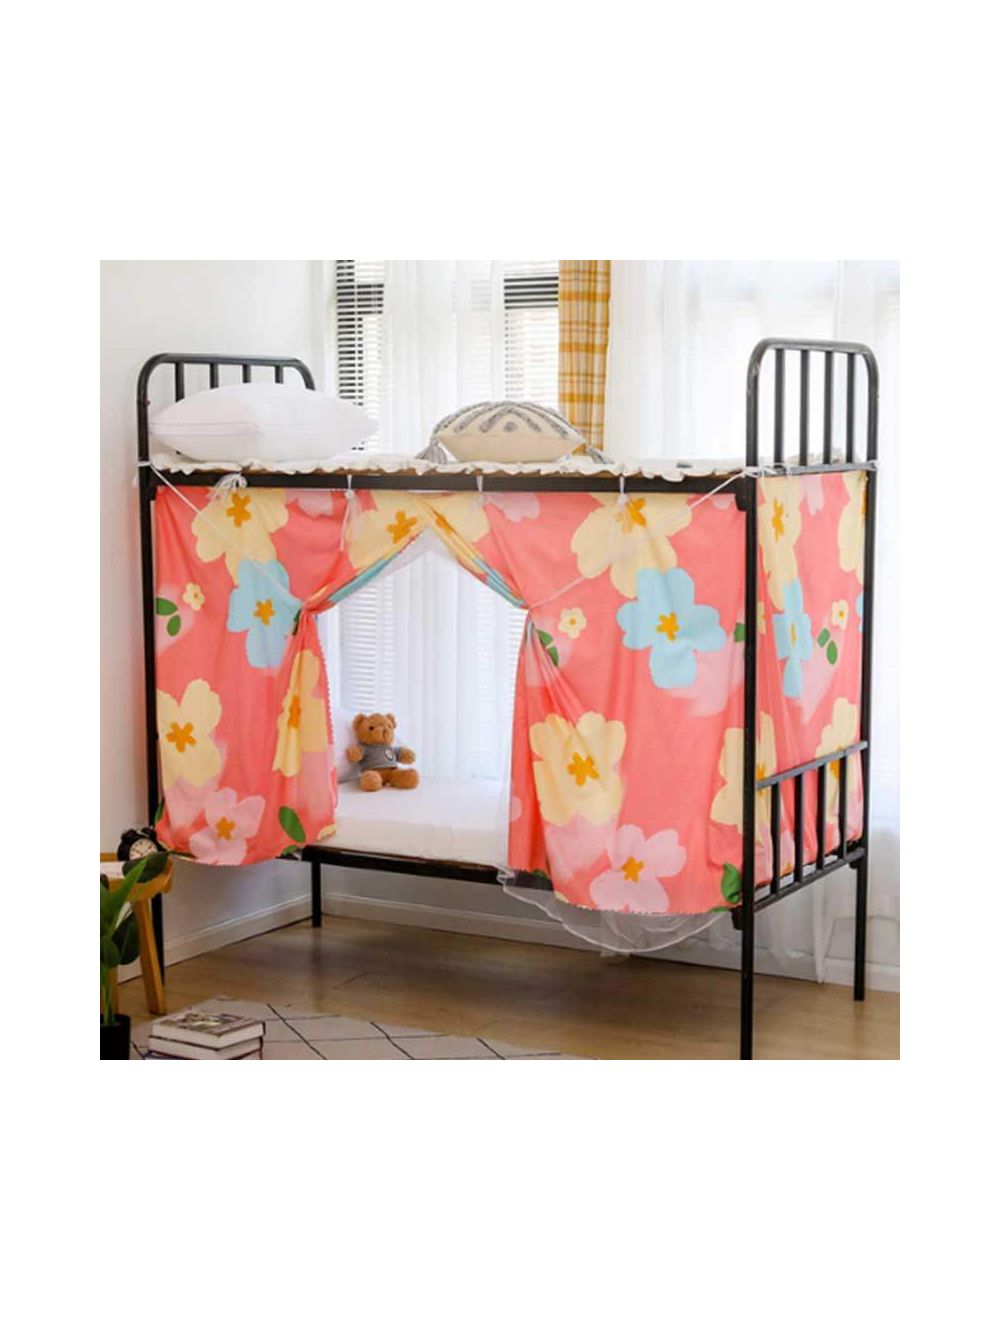 Deals for Less -Bed curtain for lower deck single bed, Flower design peach color-BC43-02